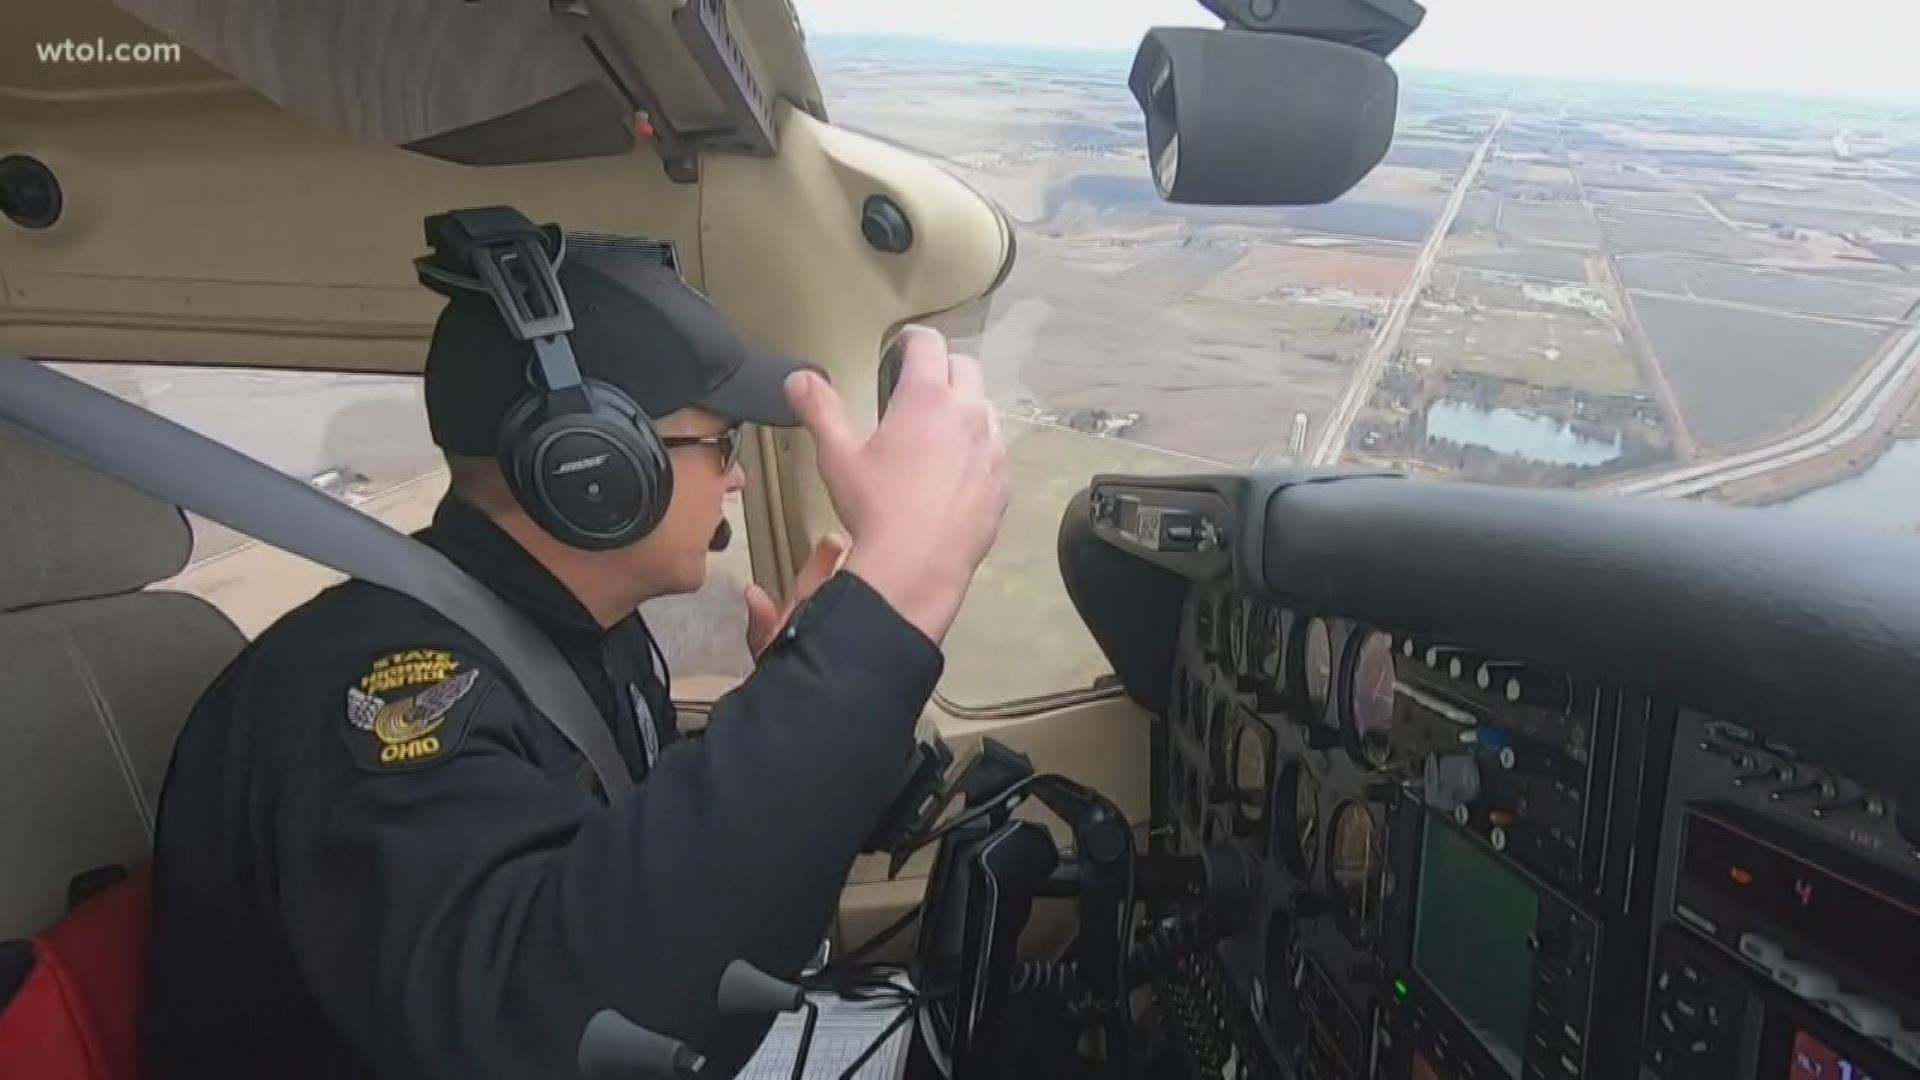 Exclusive ride: WTOL was up in the air with troopers while they caught distracted drivers from an airplane.